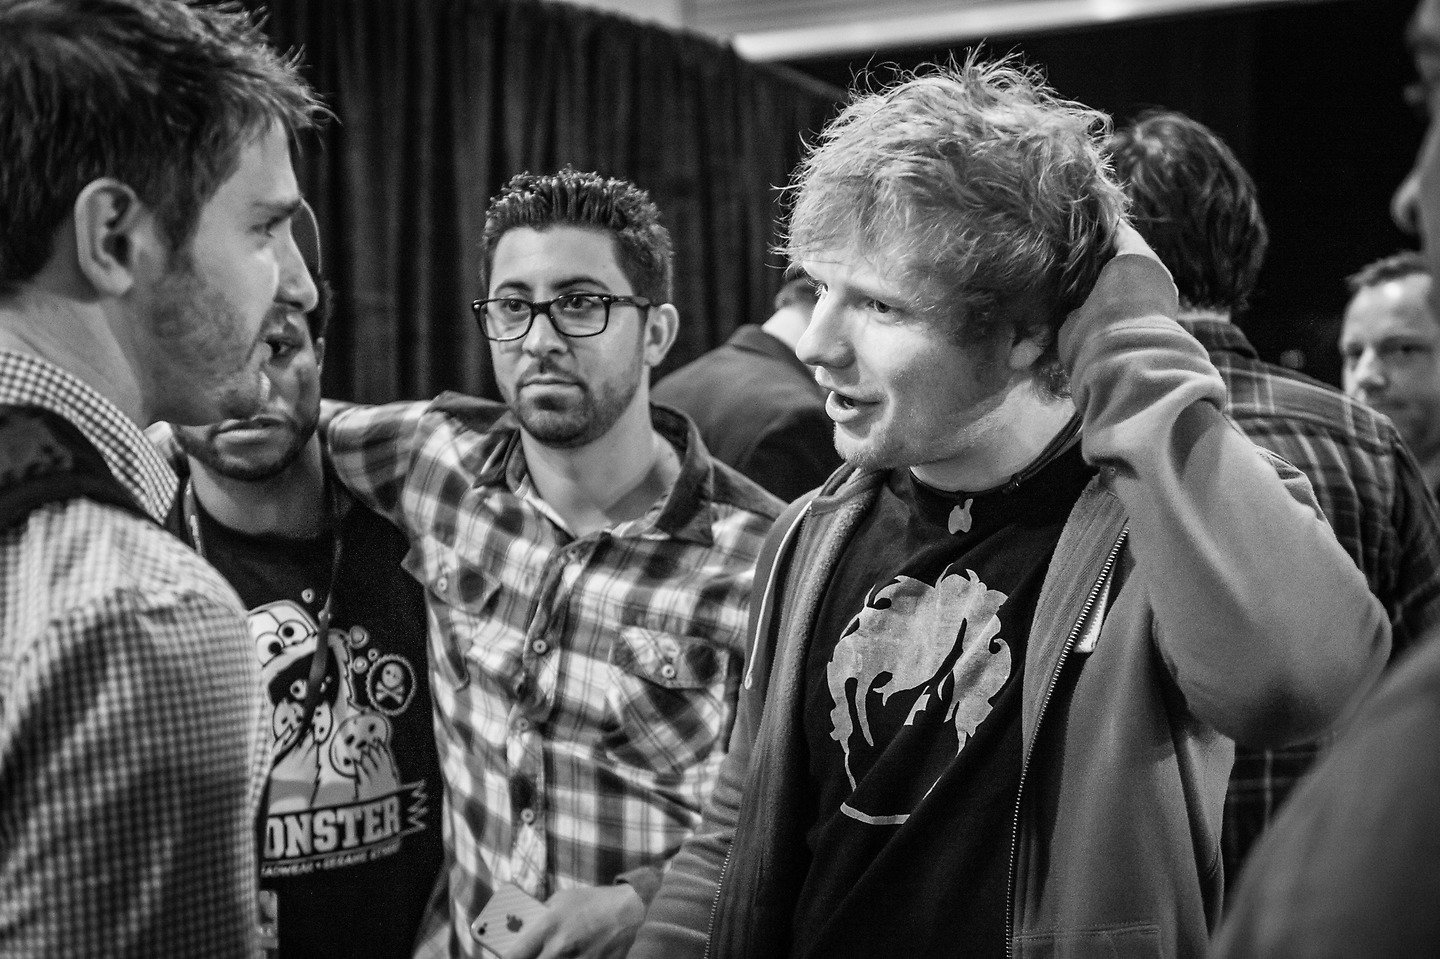 Ed Sheeran teases releasing a new single for Christmas